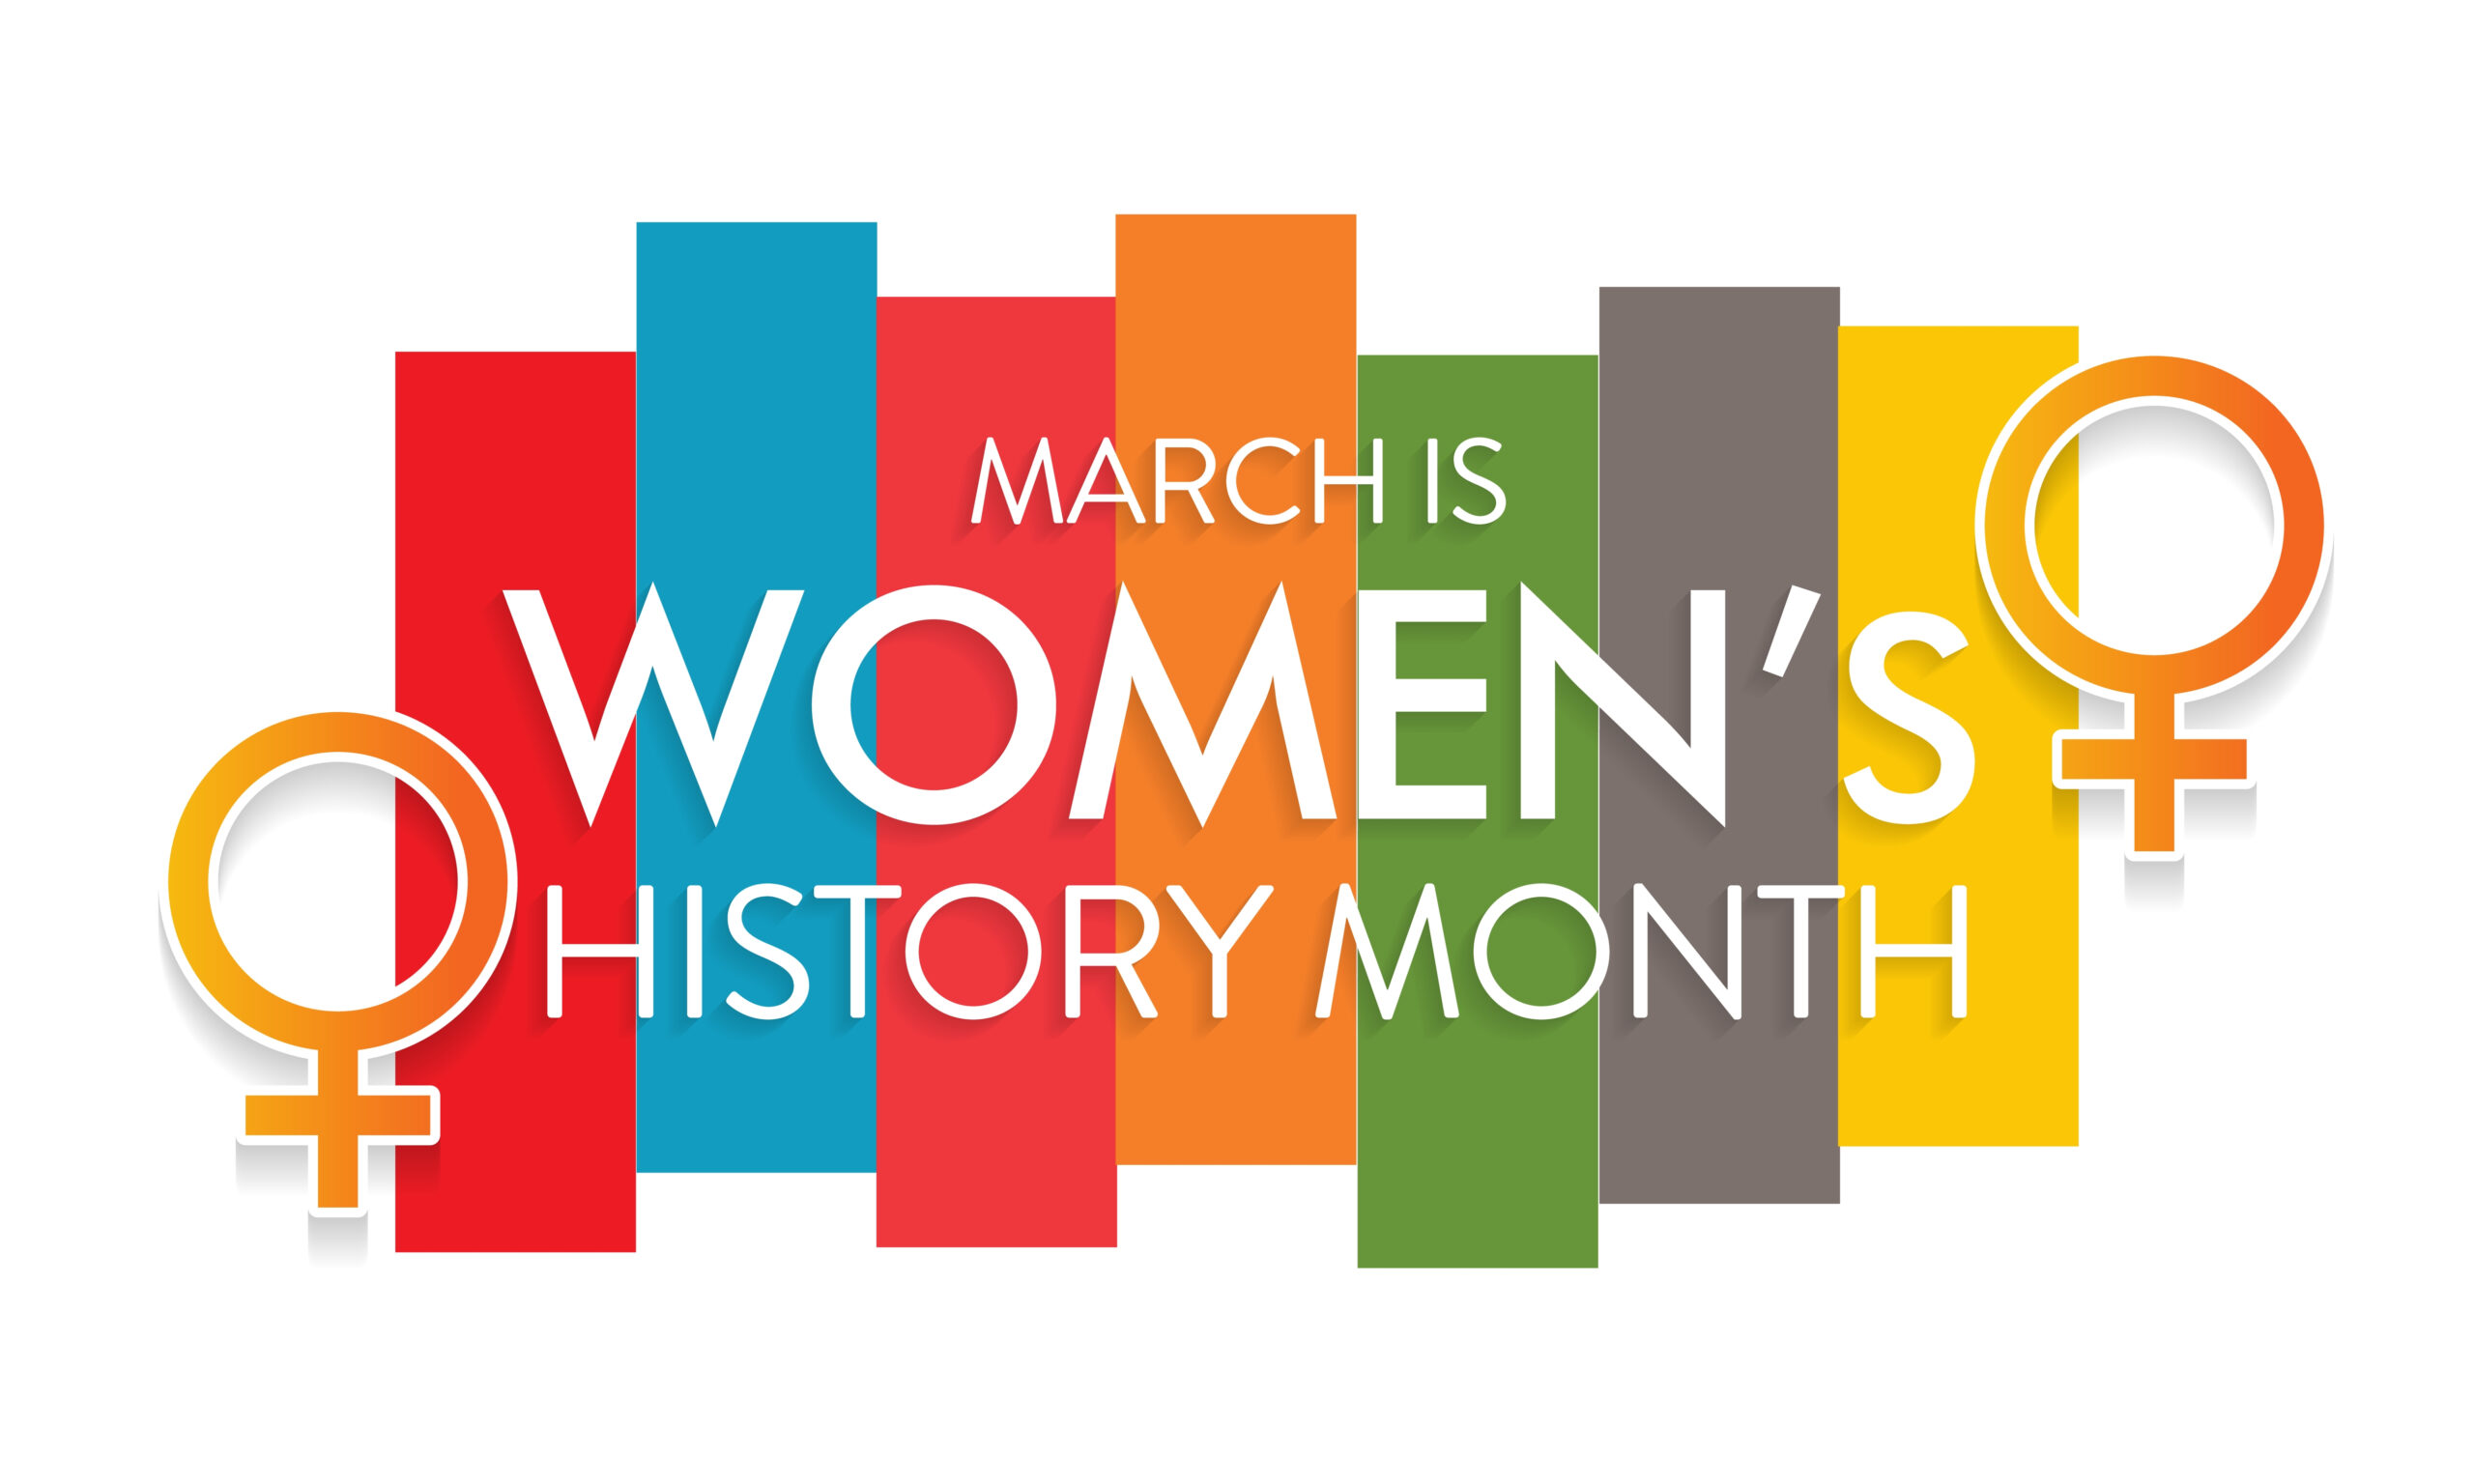 Women's,History,Month,Is,An,Annual,Declared,Month,That,Highlights